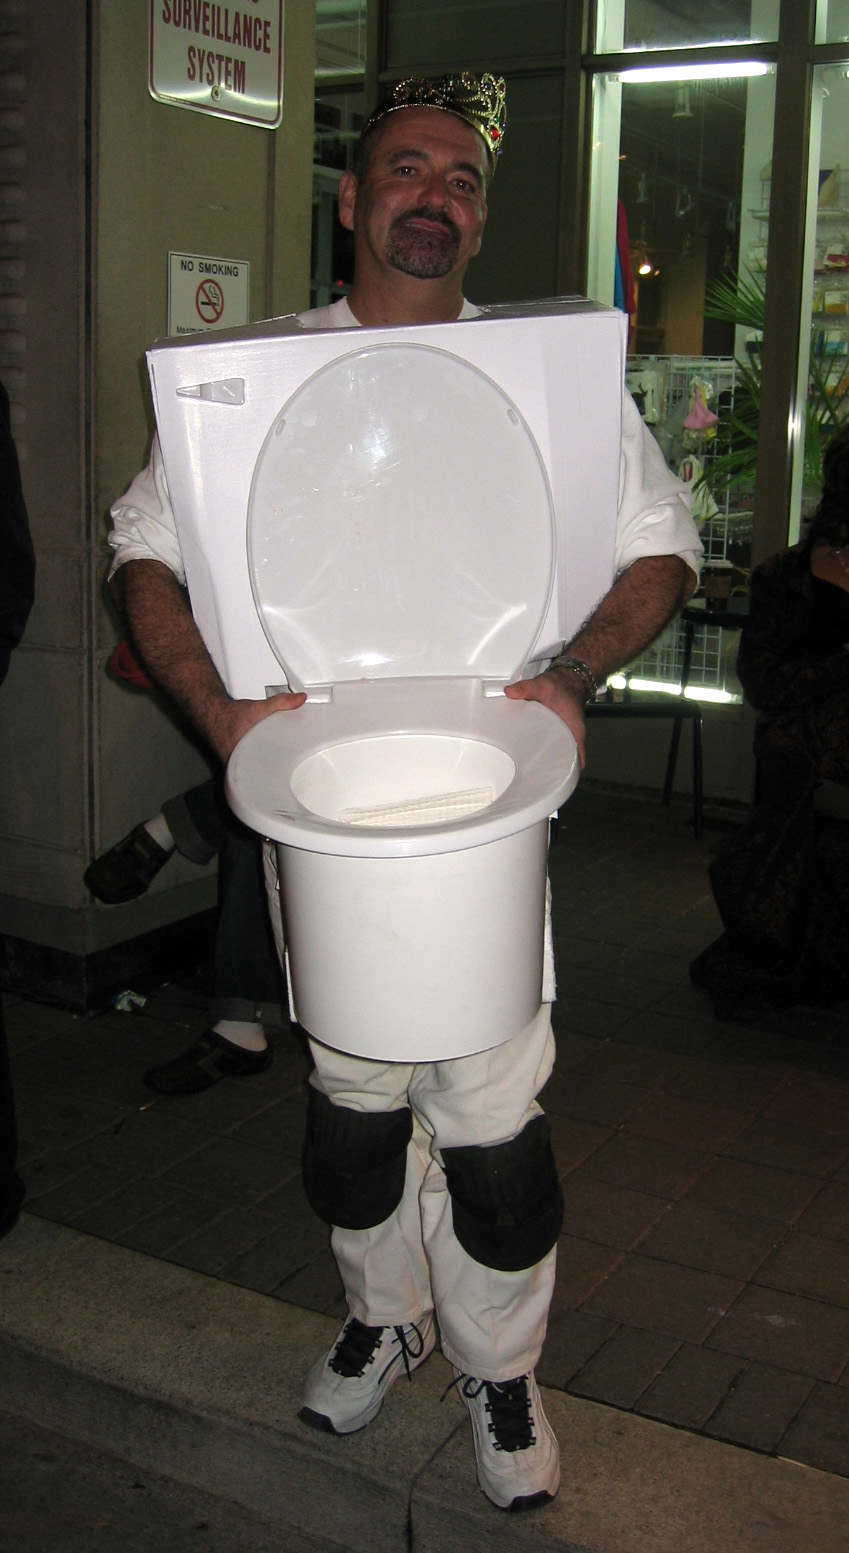 a man dressed as a soccer referee holding a toilet